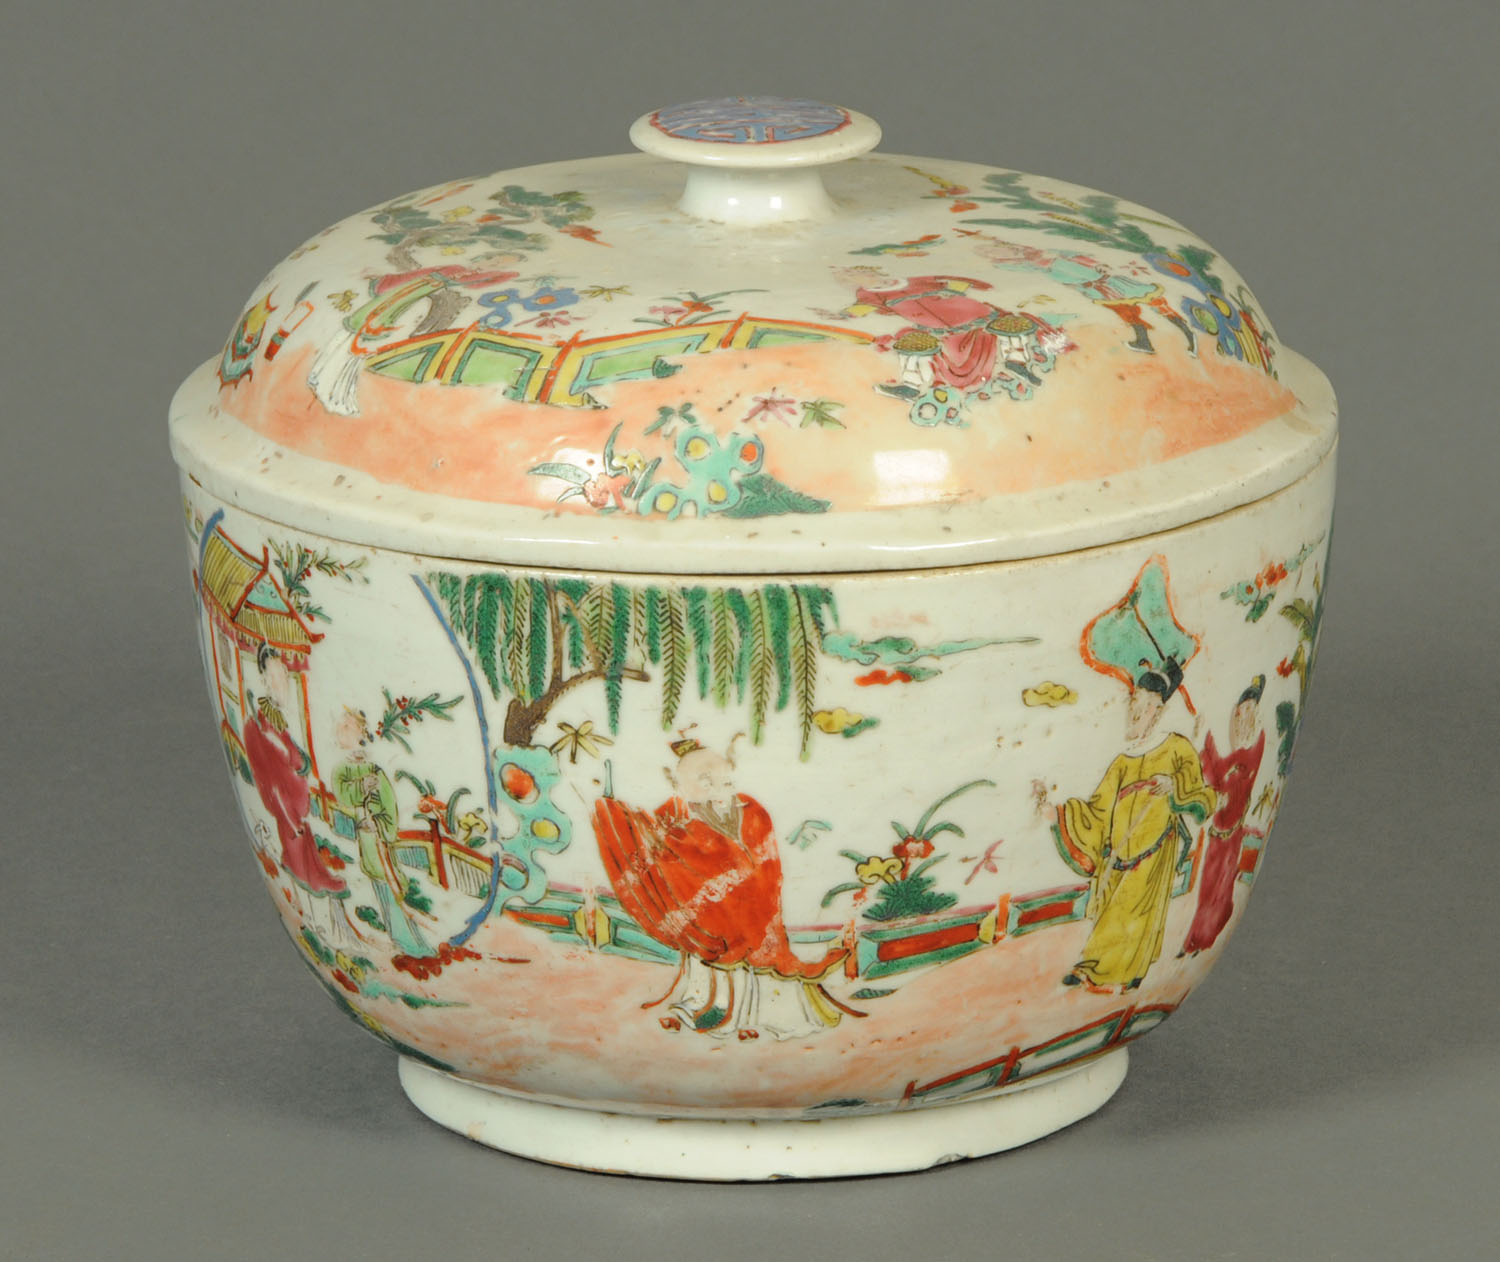 A large 19th century Chinese bowl and cover, decorated with figures.